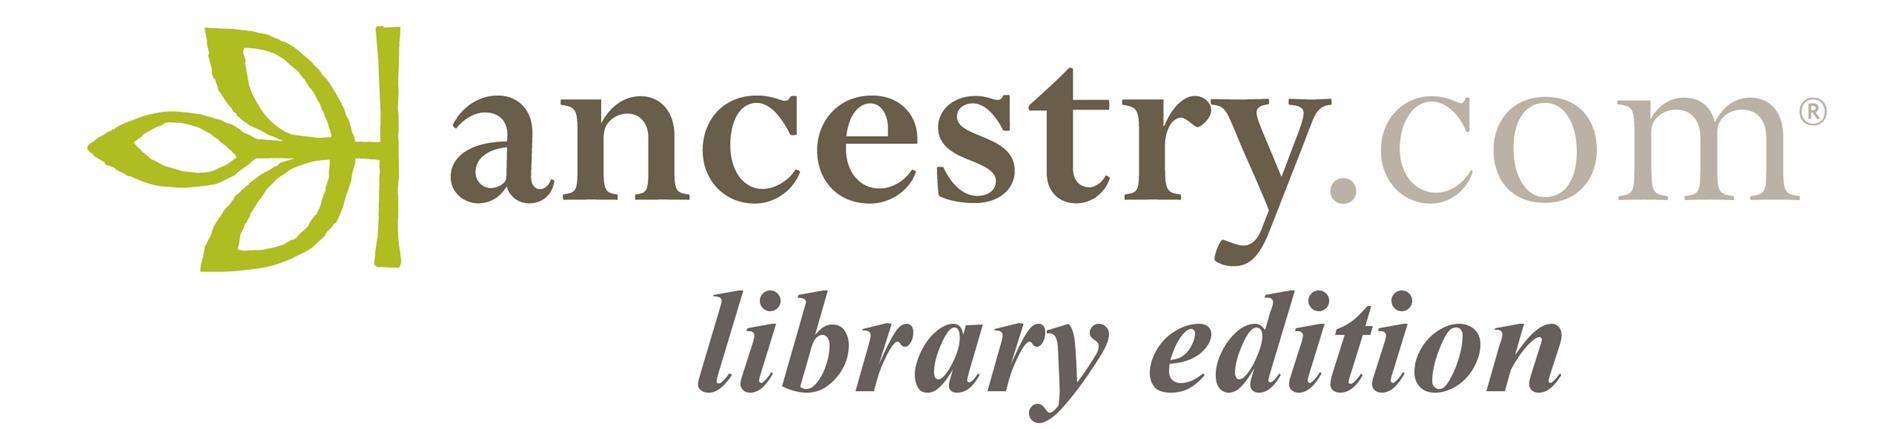 Alabama Public Library Service has extended free, at home access to Ancestry Library Edition through June 31, 2021! Click the "How To Access" video button, or find instructions for access on the ADULT RESOURCES page; look under the RESOURCES tab in the menu bar.